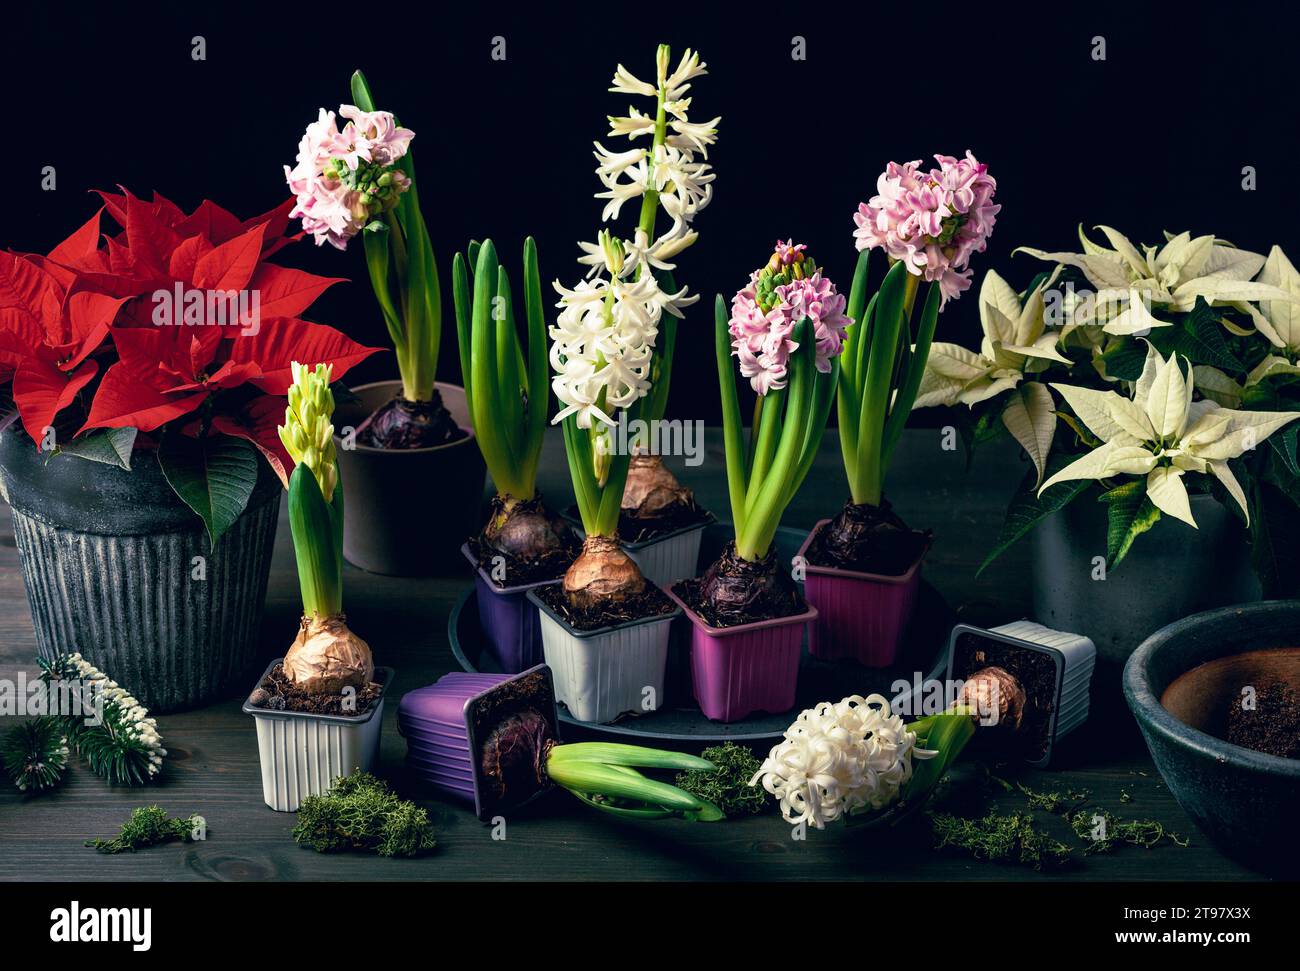 planting winter or spring flowers hyacinth poinsettia on black background, gardening concept Stock Photo